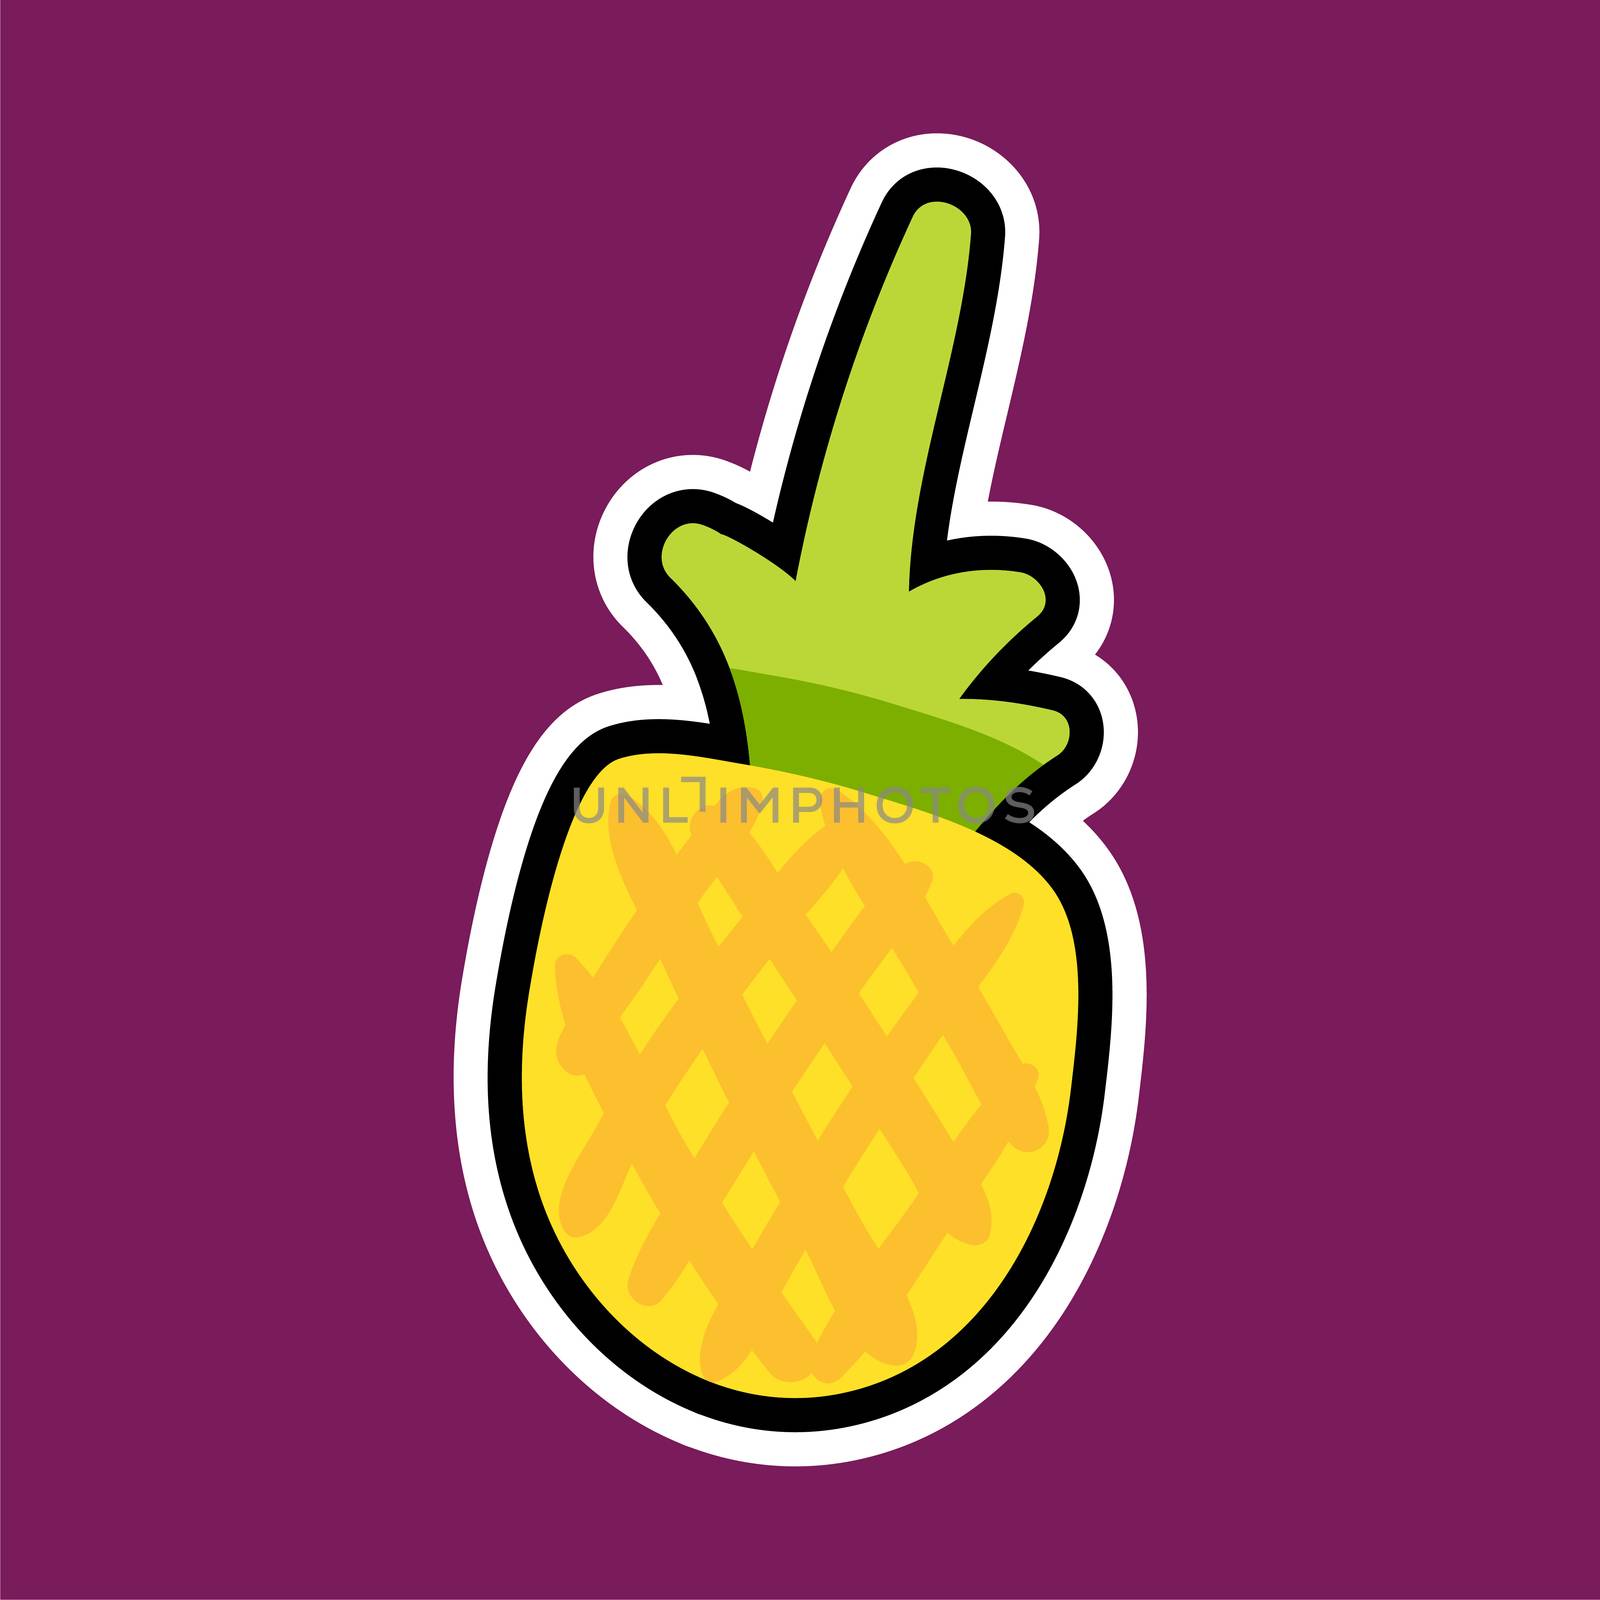 Pineapple cartoon sticker. Sweet fruit label. Patch and print for t-shirt, fabric, clothes. Menu item. Juice and summer symbol. Vector